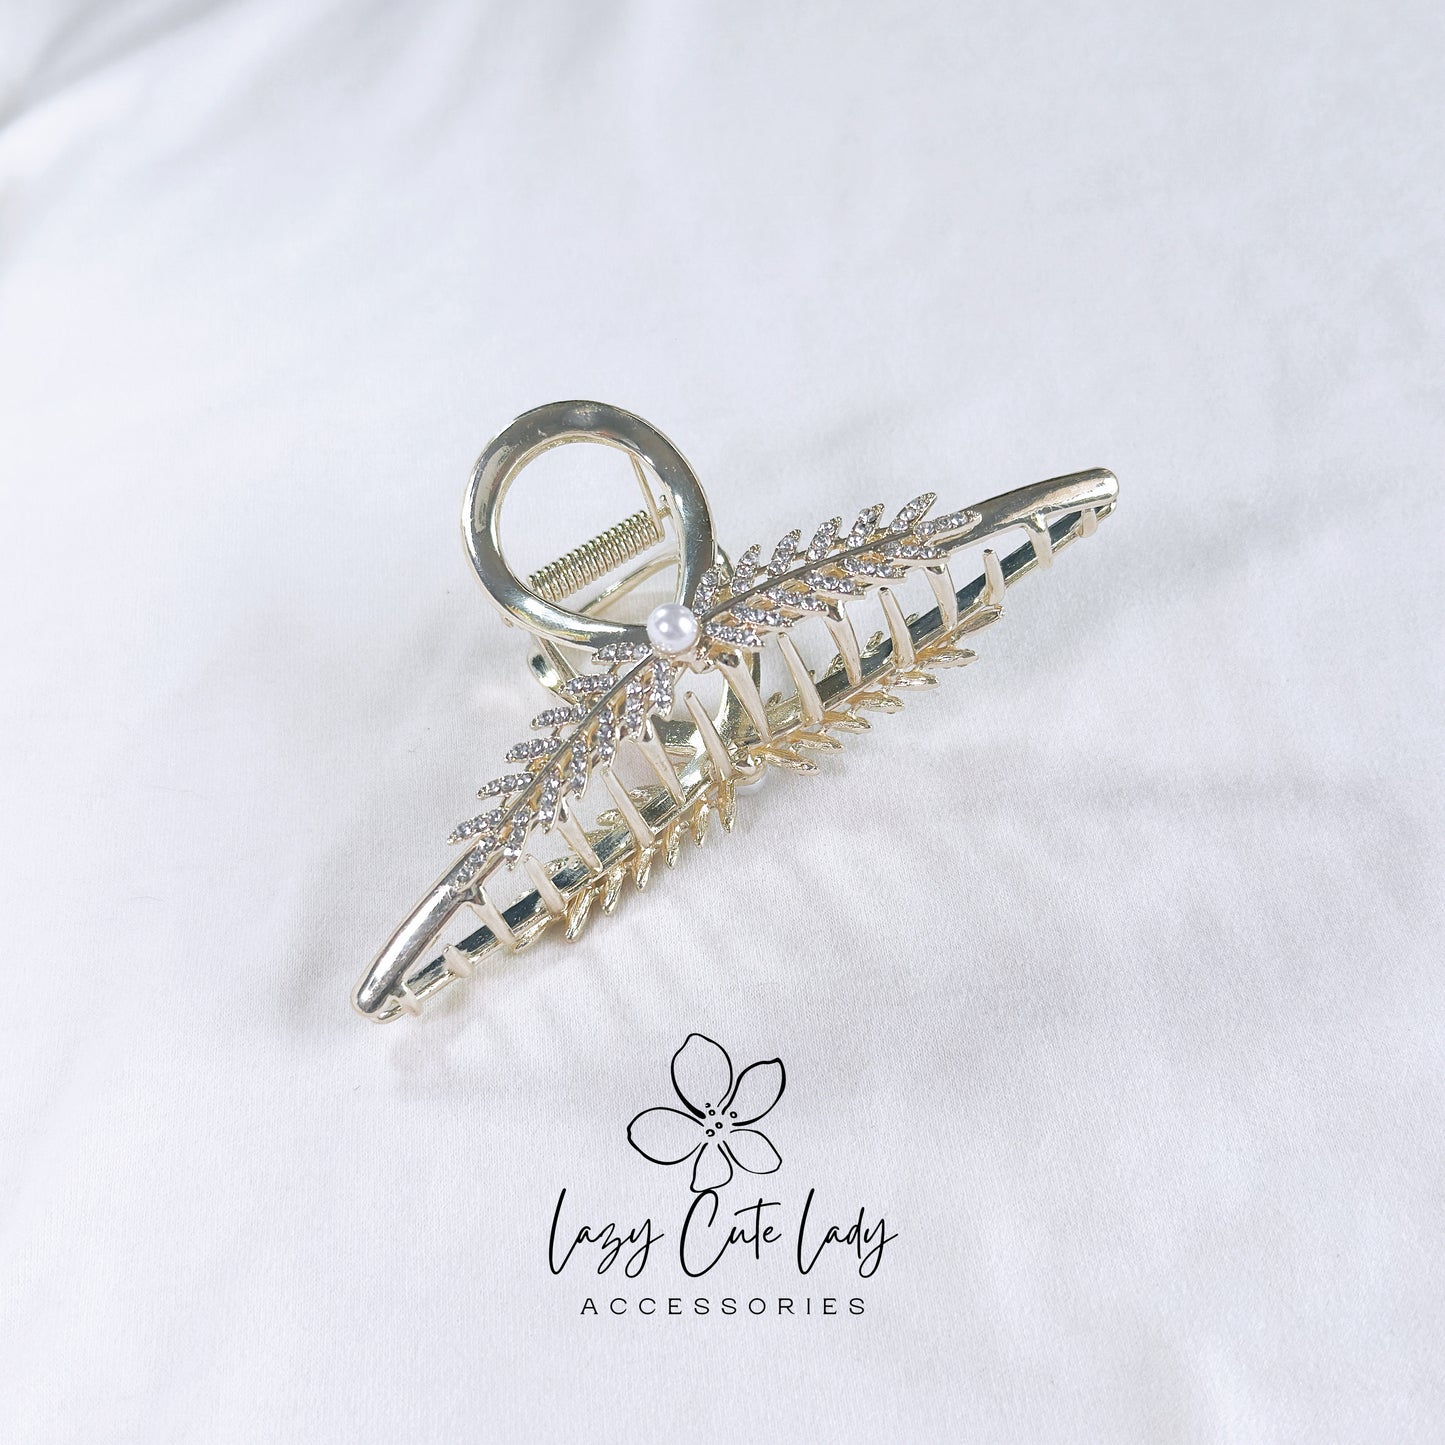 Elegant Metal Hair Claw Clip with Rhinestone Accent – Sophisticated and Stylish